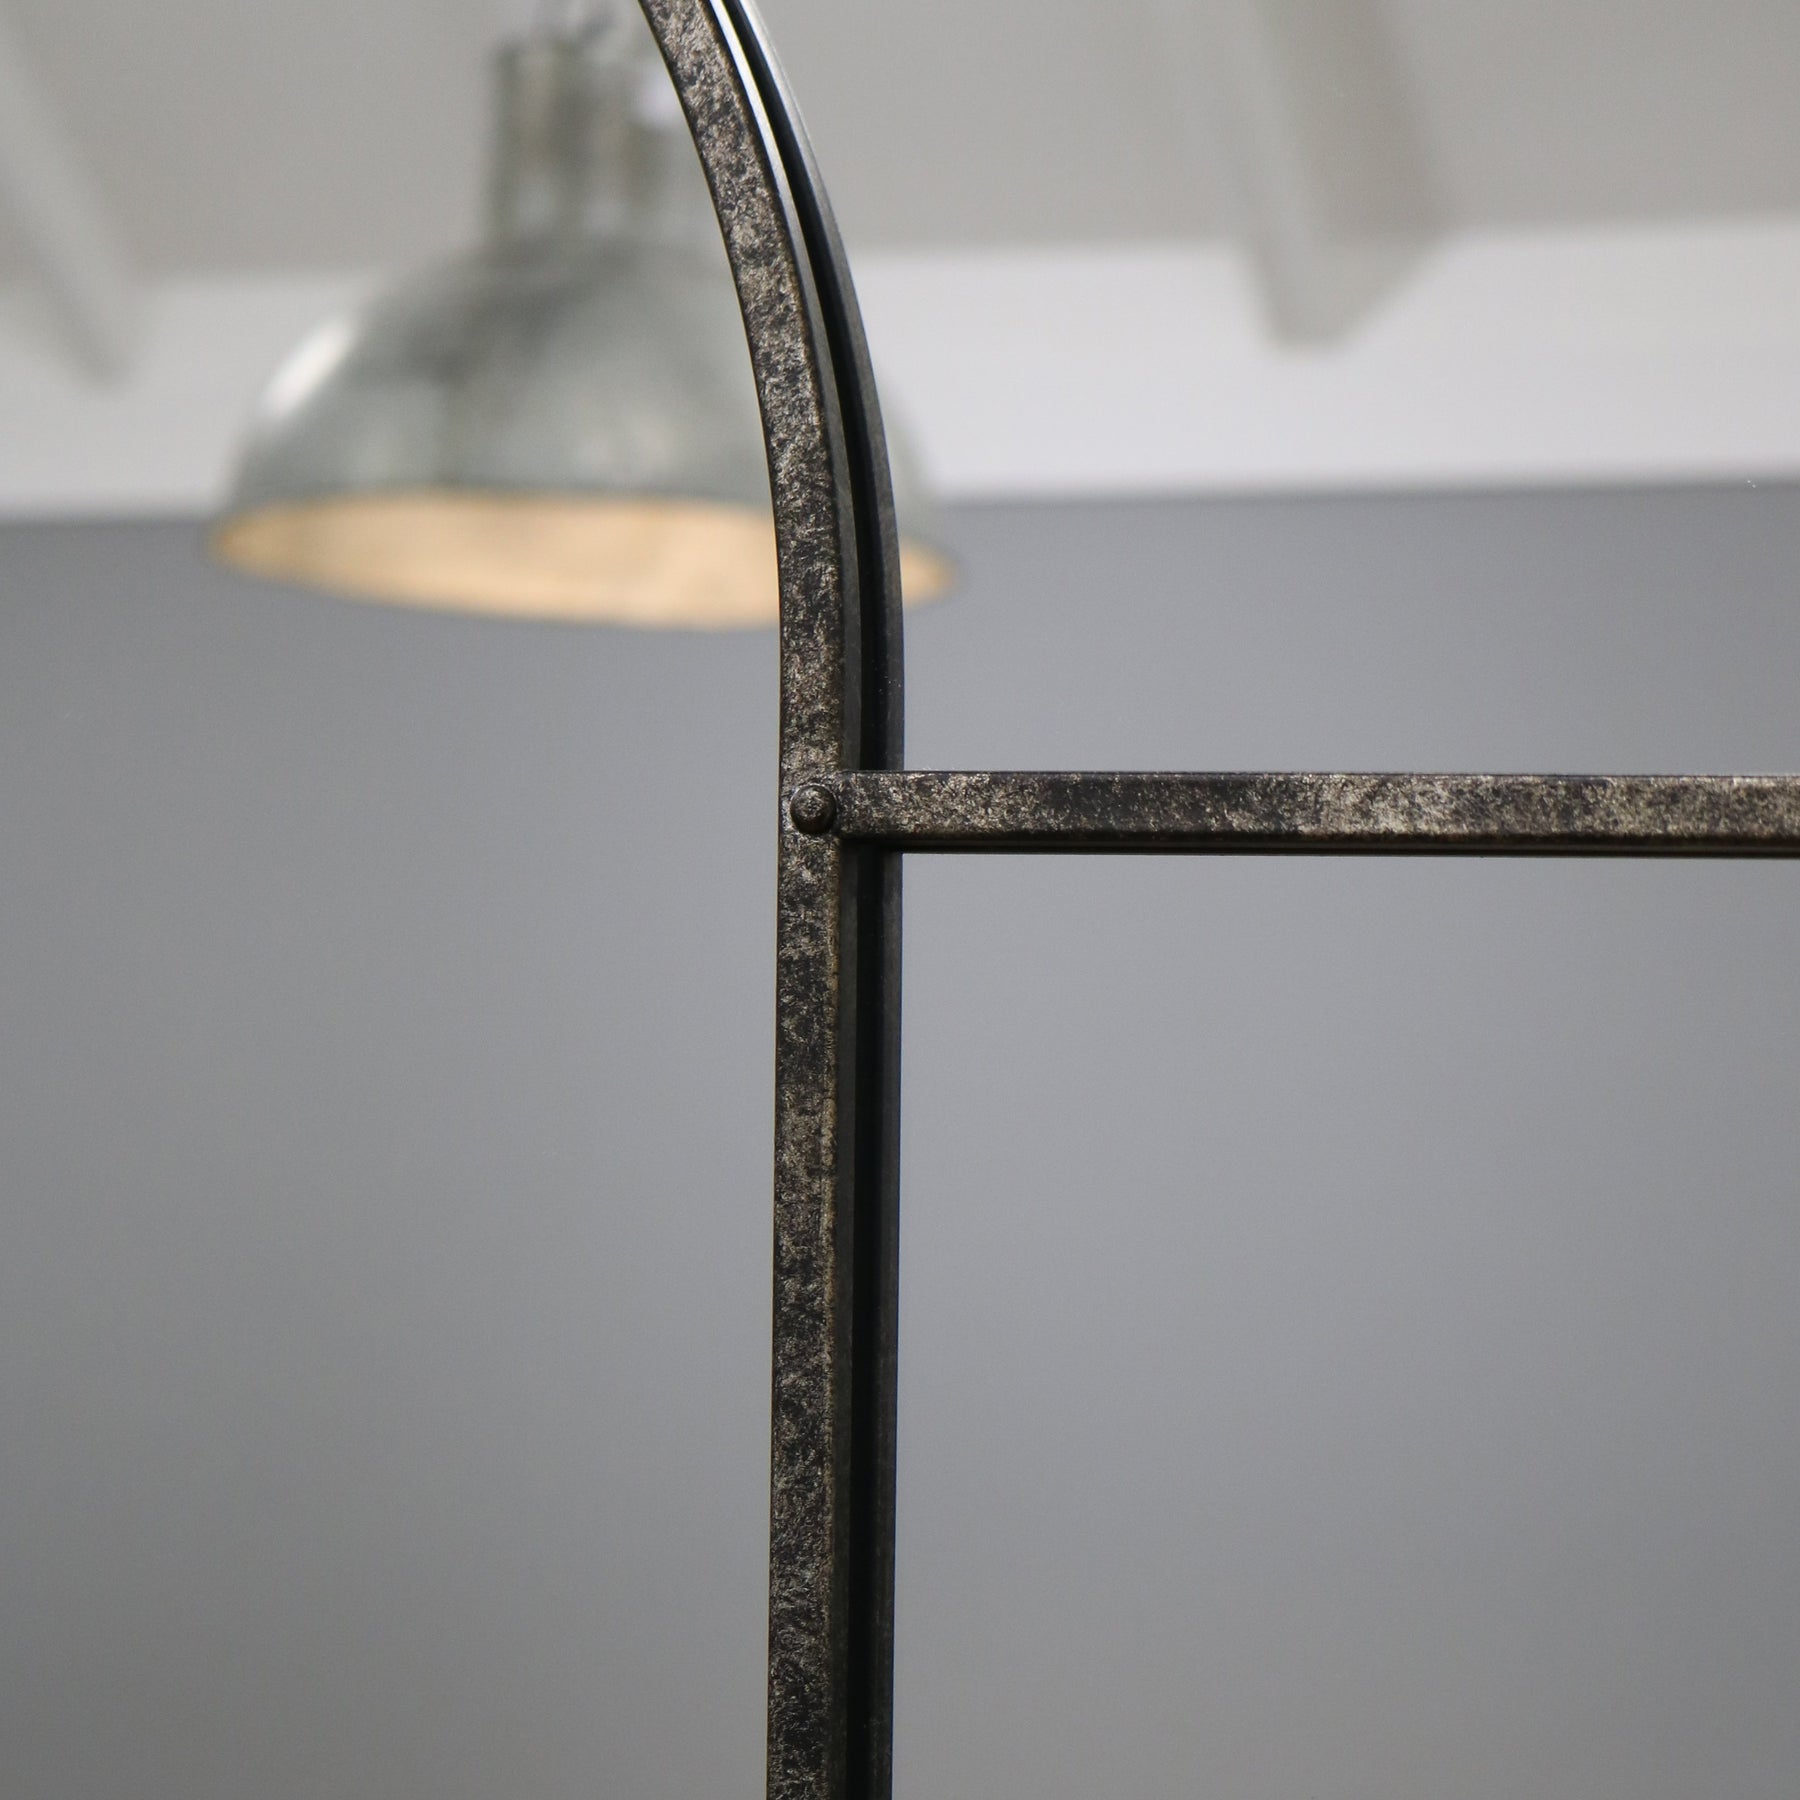 Crushed black industrial arched metal wall mirror closeup of industrial frame design